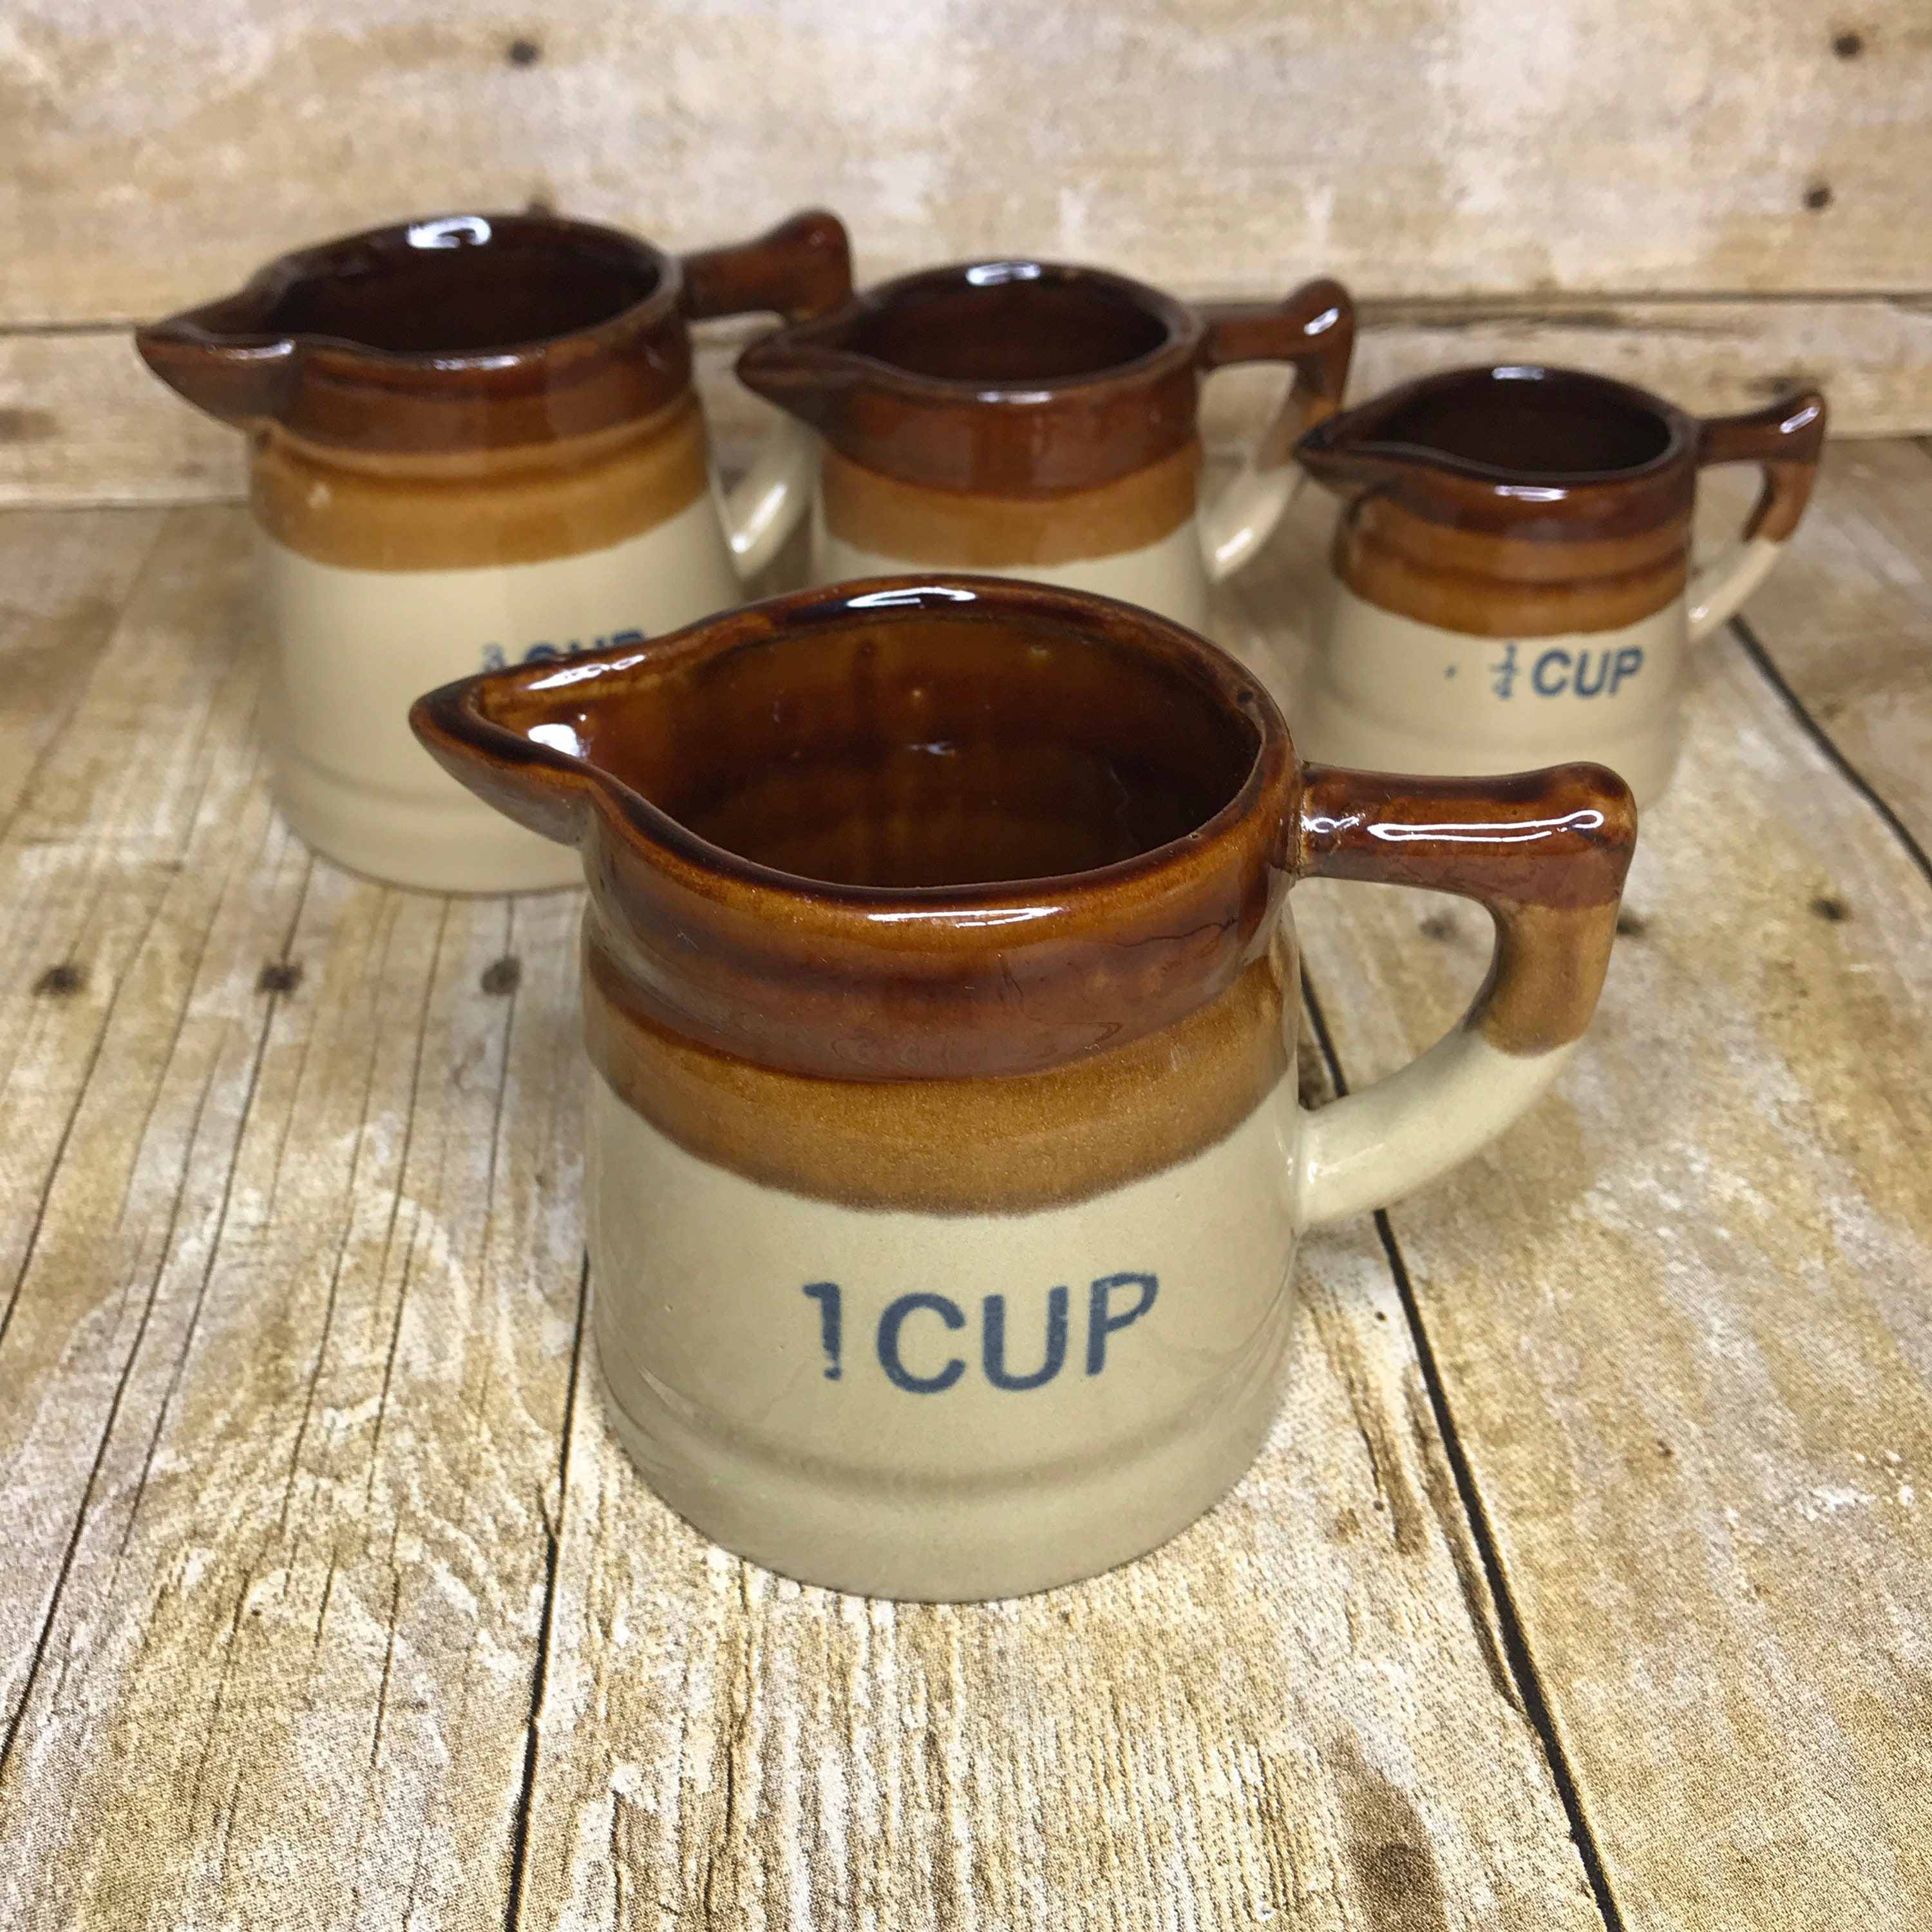 B+W Stoneware Measuring Cups with Gold Rim